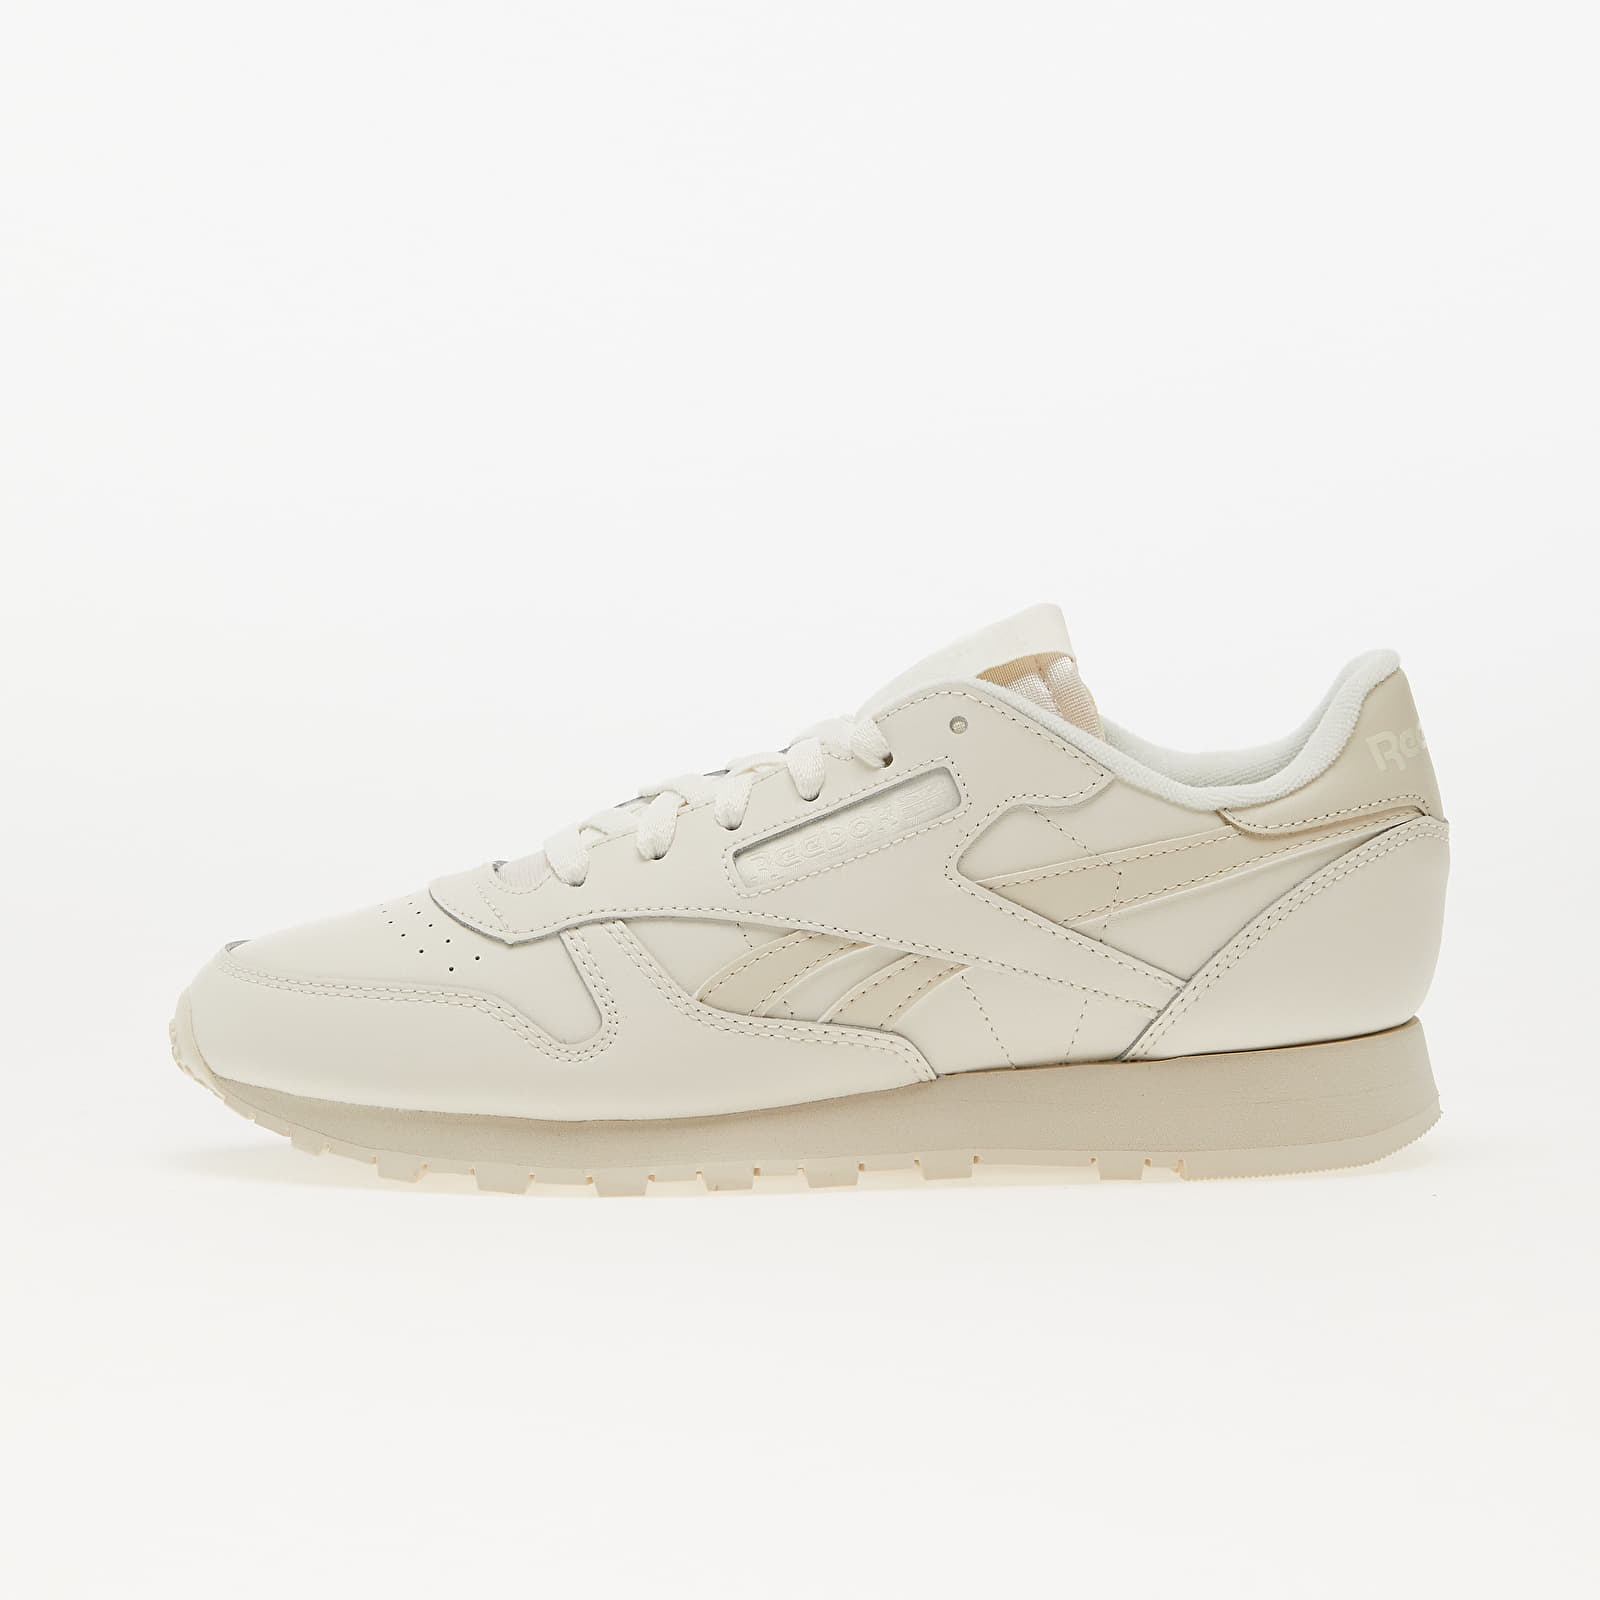 Women's shoes Reebok Classic Leather Chalk/ Paper White/ Alabaster